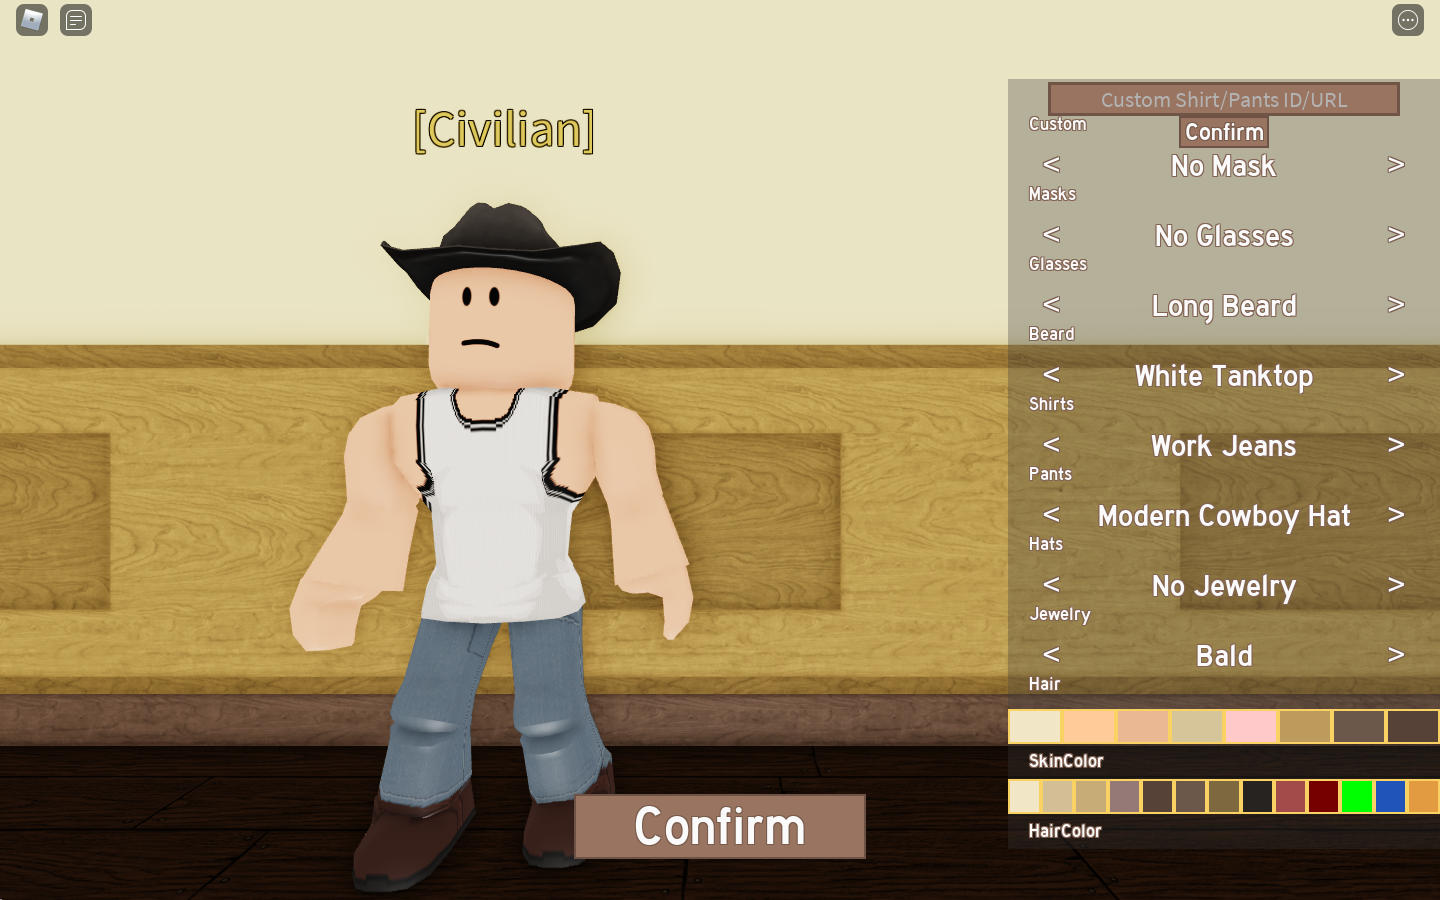 NEW ROBLOX Avatar Editor Update! No one noticed it!? 